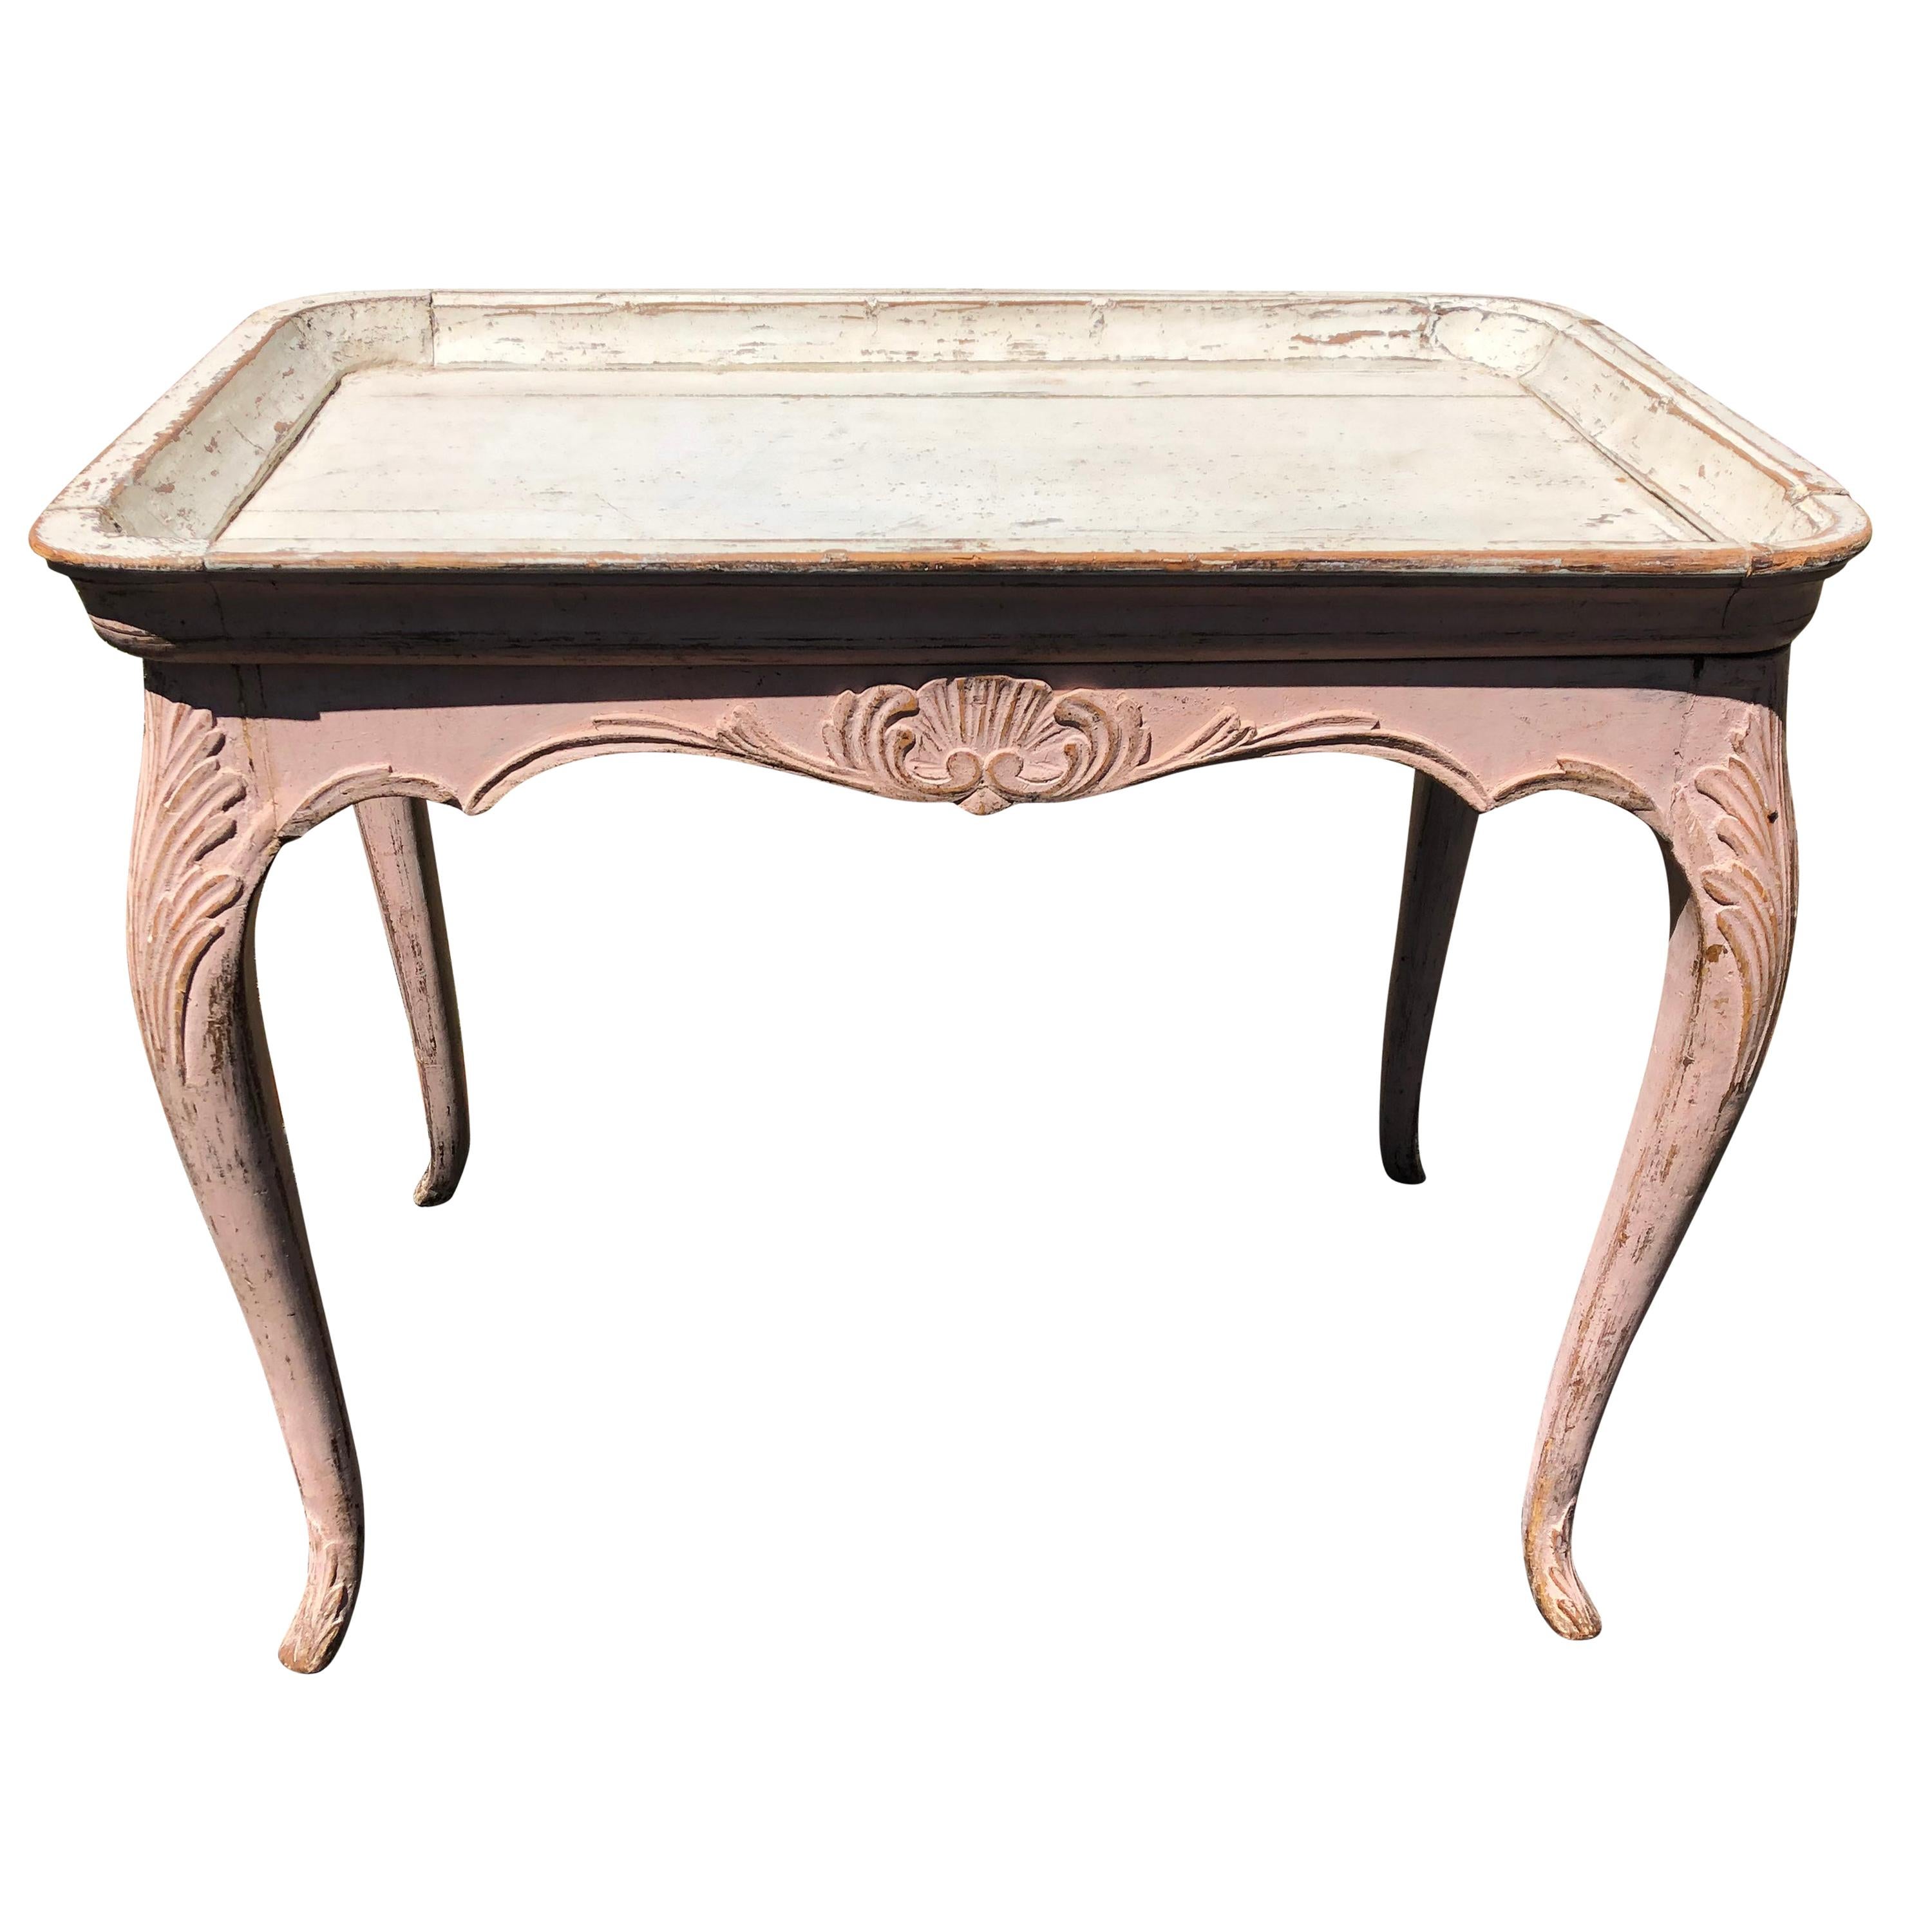 19th Century Swedish Painted Tray Table